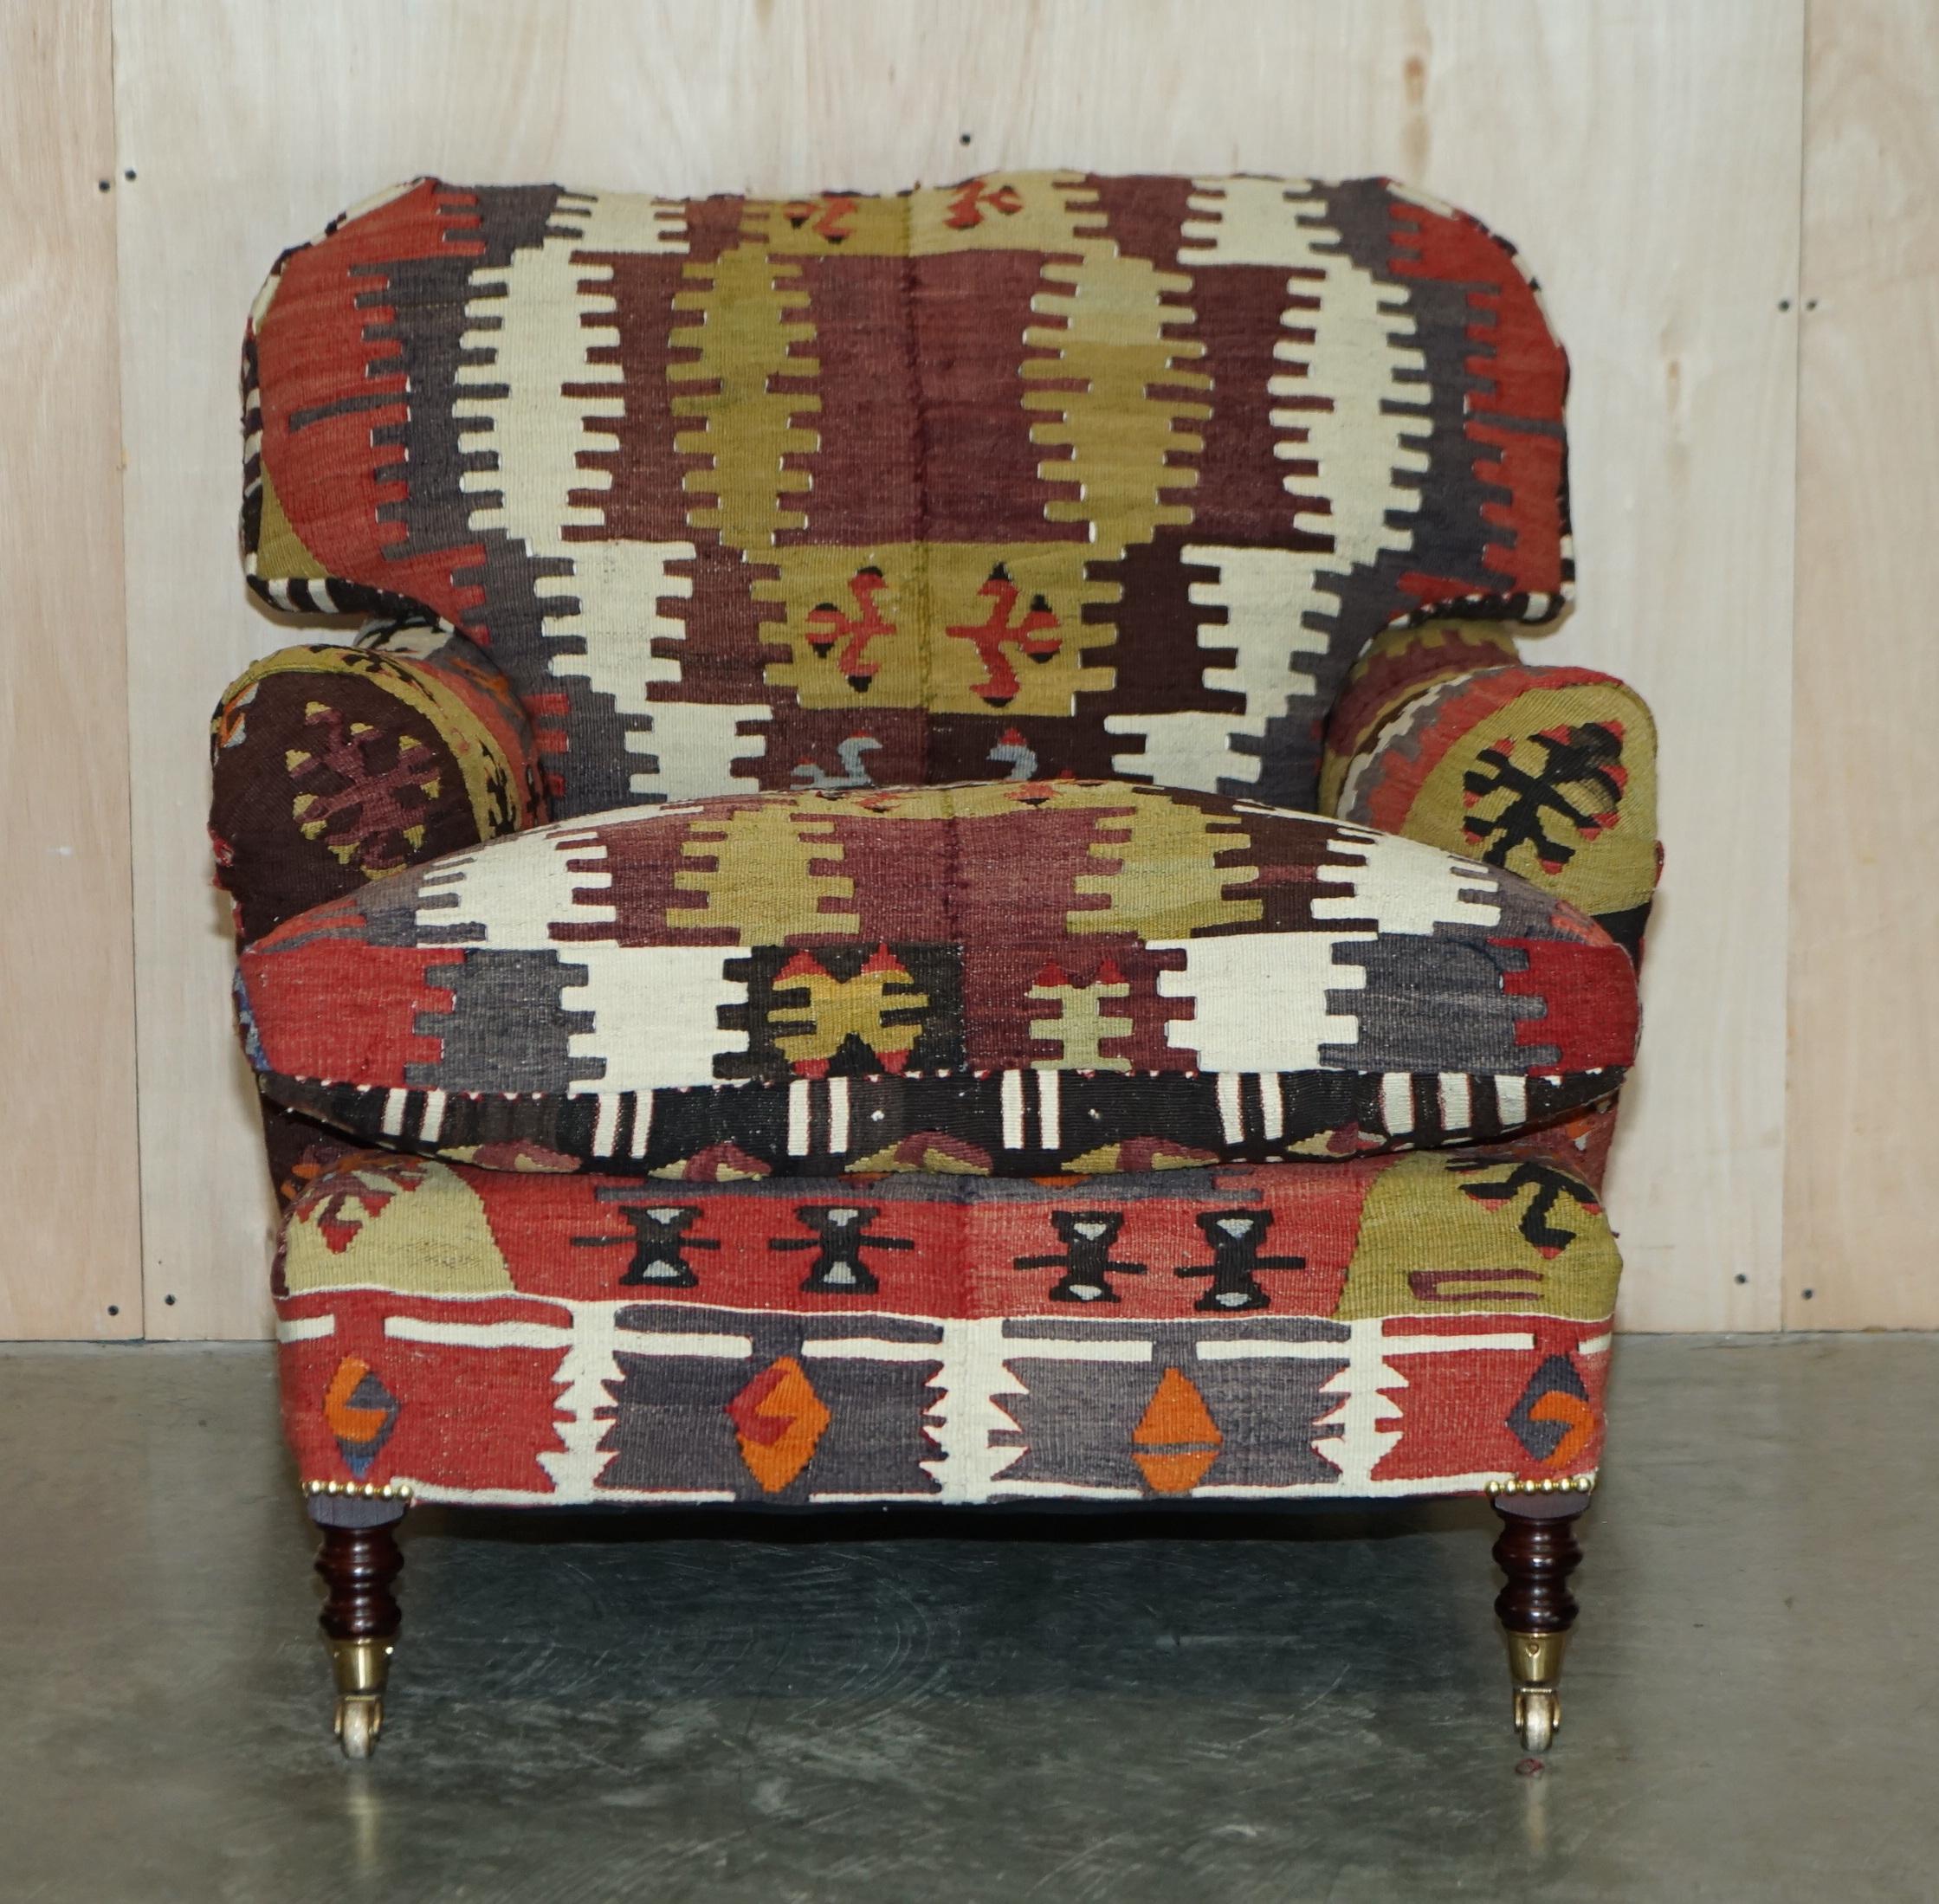 We are delighted to offer for sale this hand made in England, George Smith Signature Standard arm, feather cushion back and base, Kilim upholstered armchair which was custom made to order.

A very good looking well made piece, this is the only